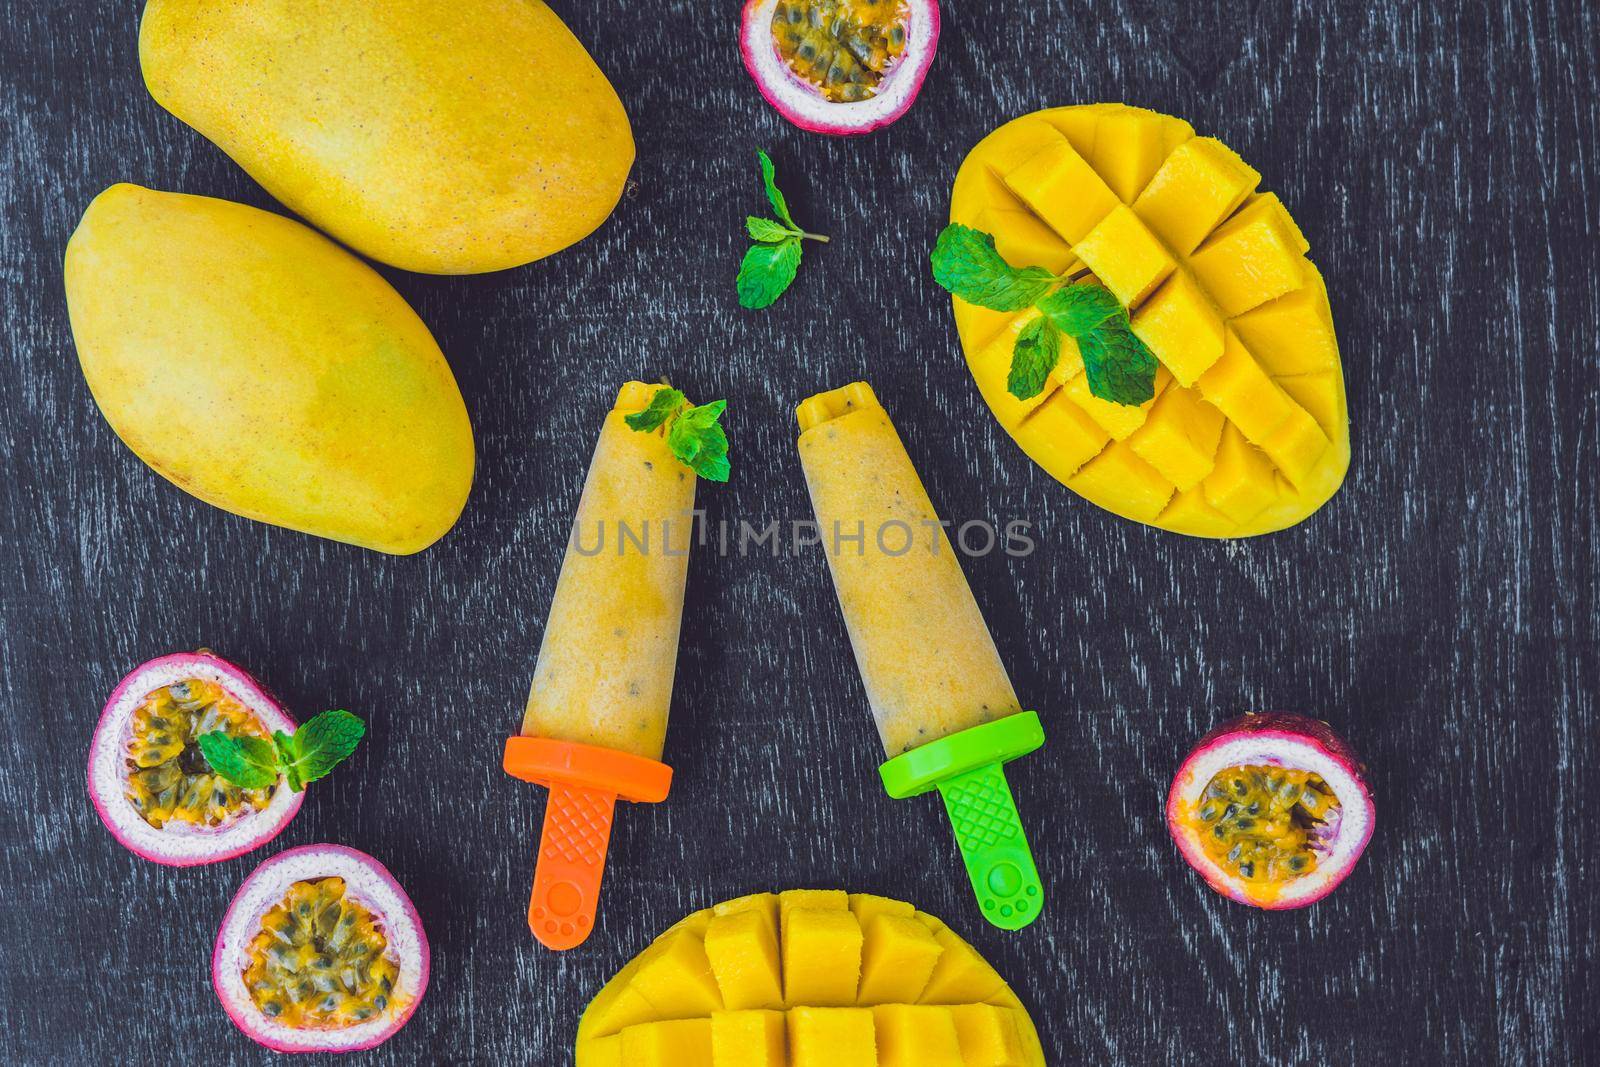 Homemade ice cream from mango and passion fruit Popsicle.